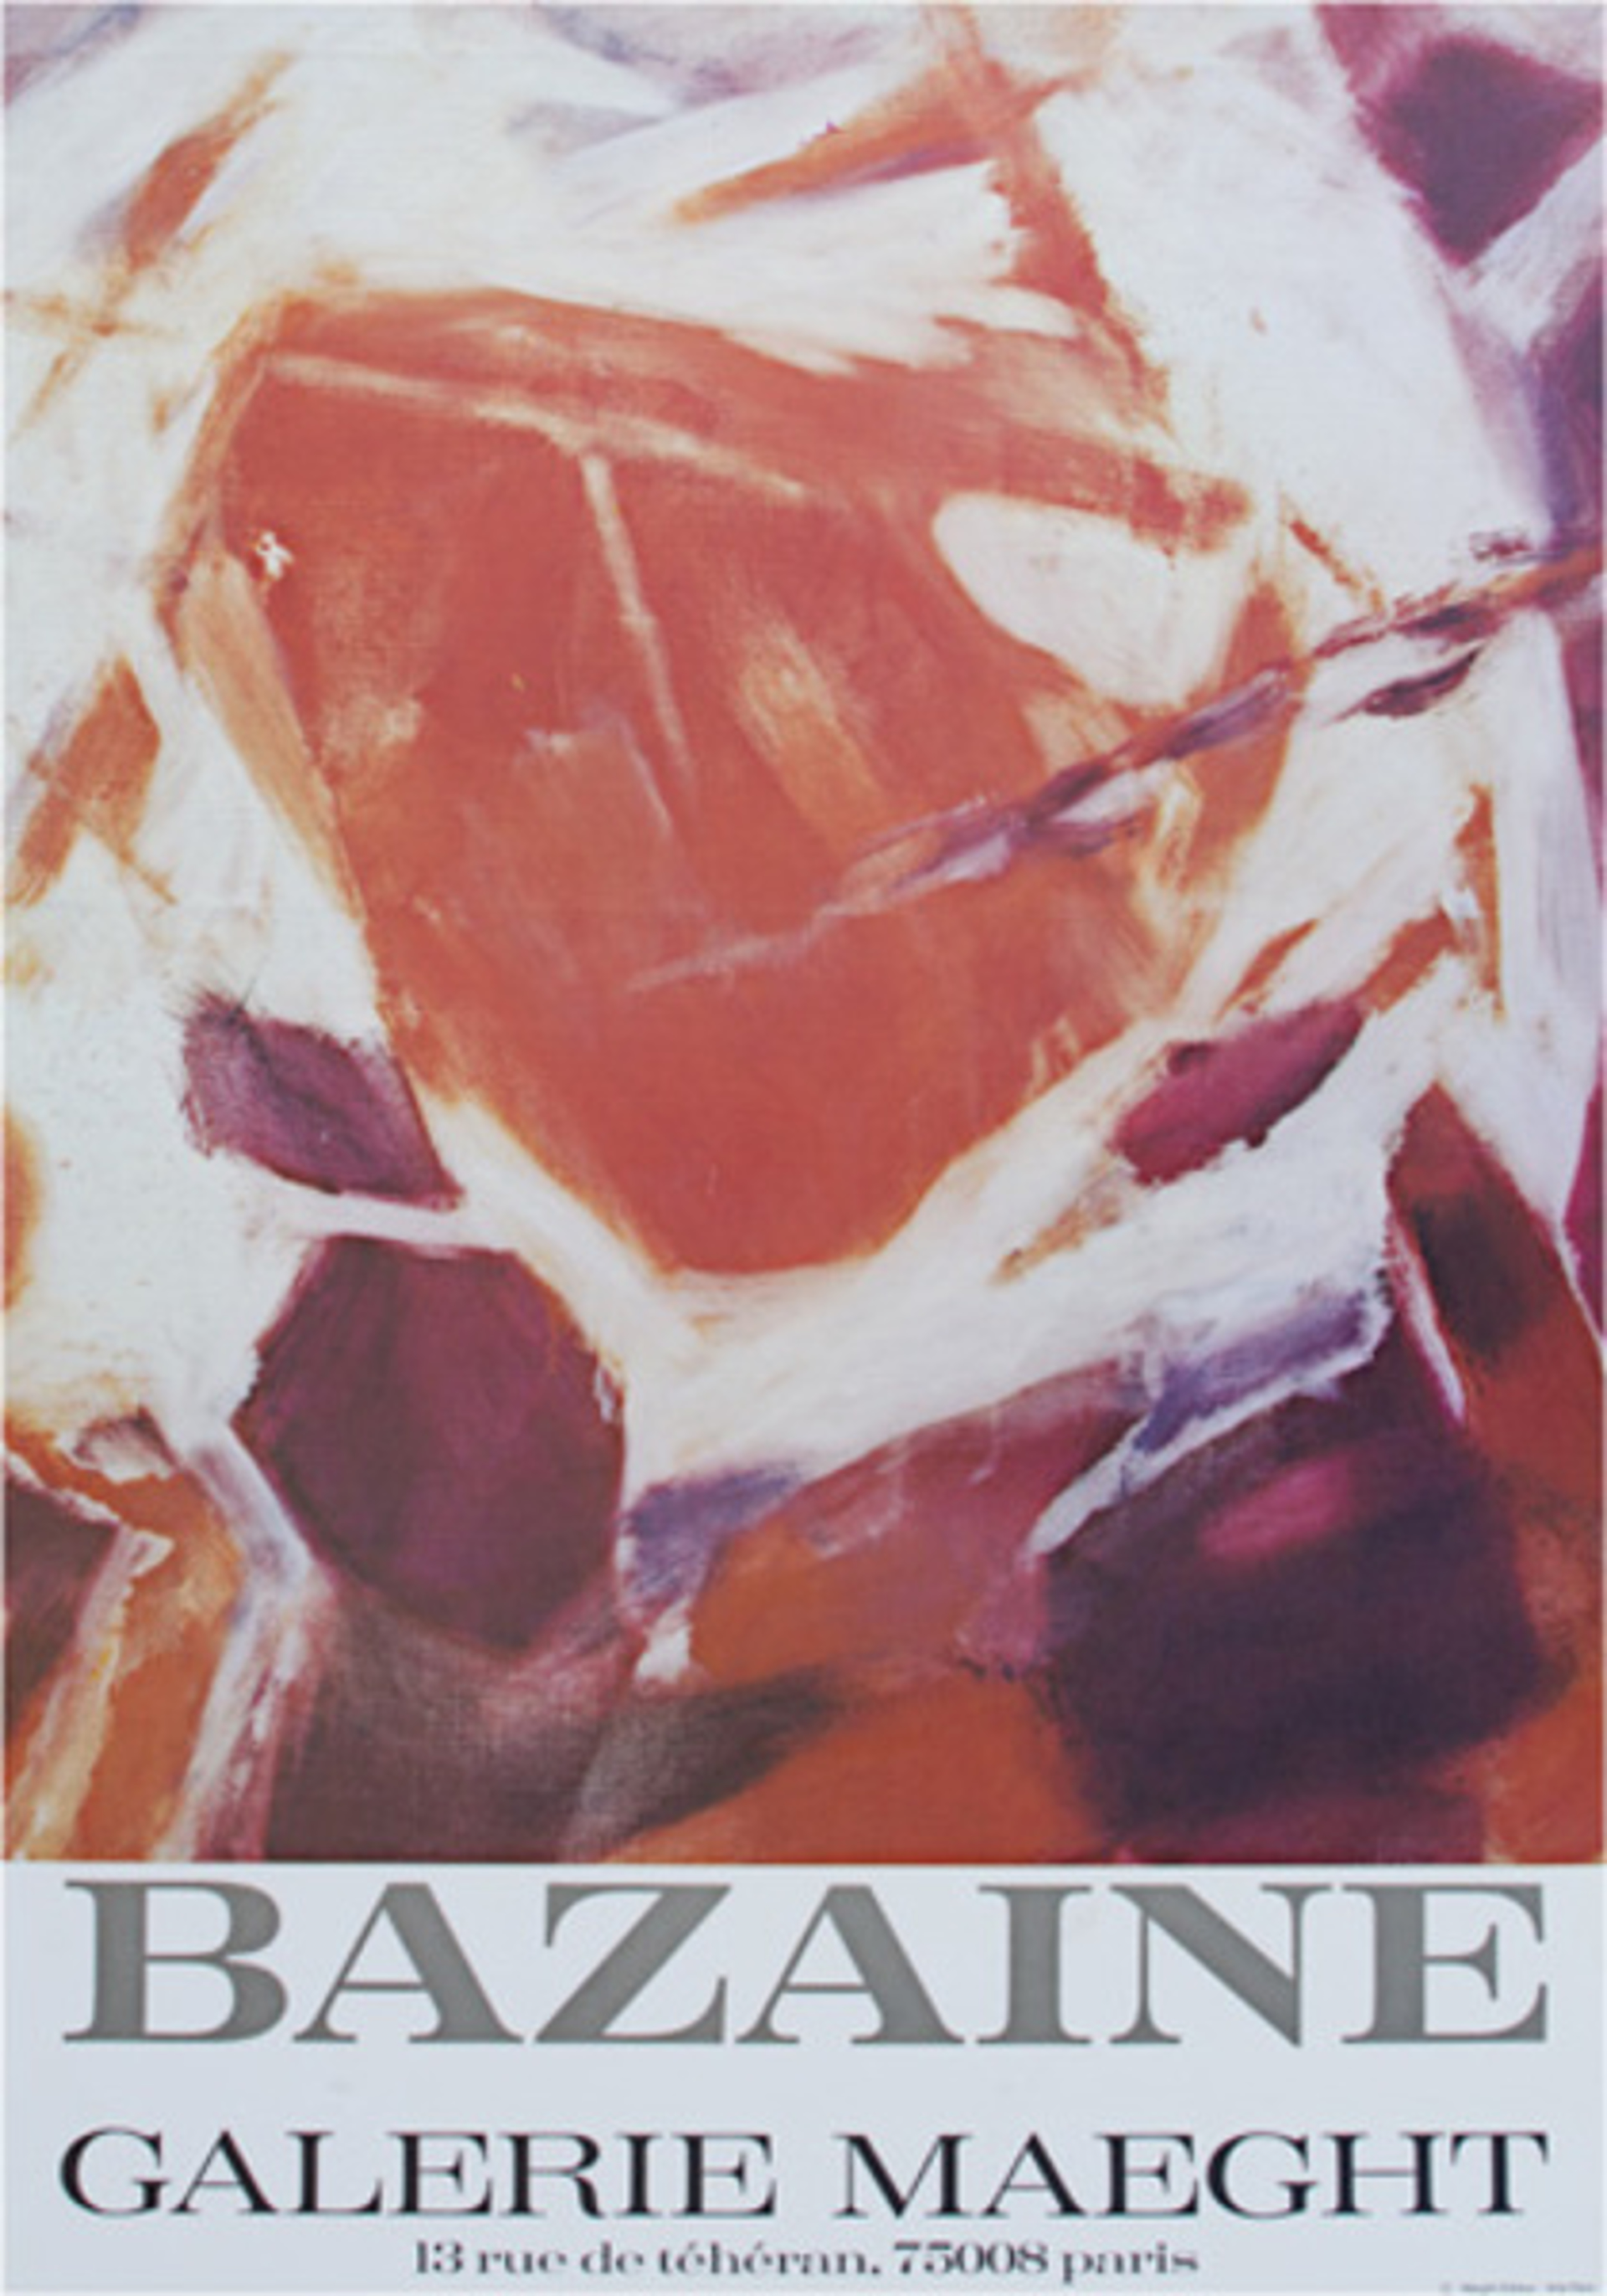 Galerie Maeght, Exhibition Poster by Jean Rene Bazaine